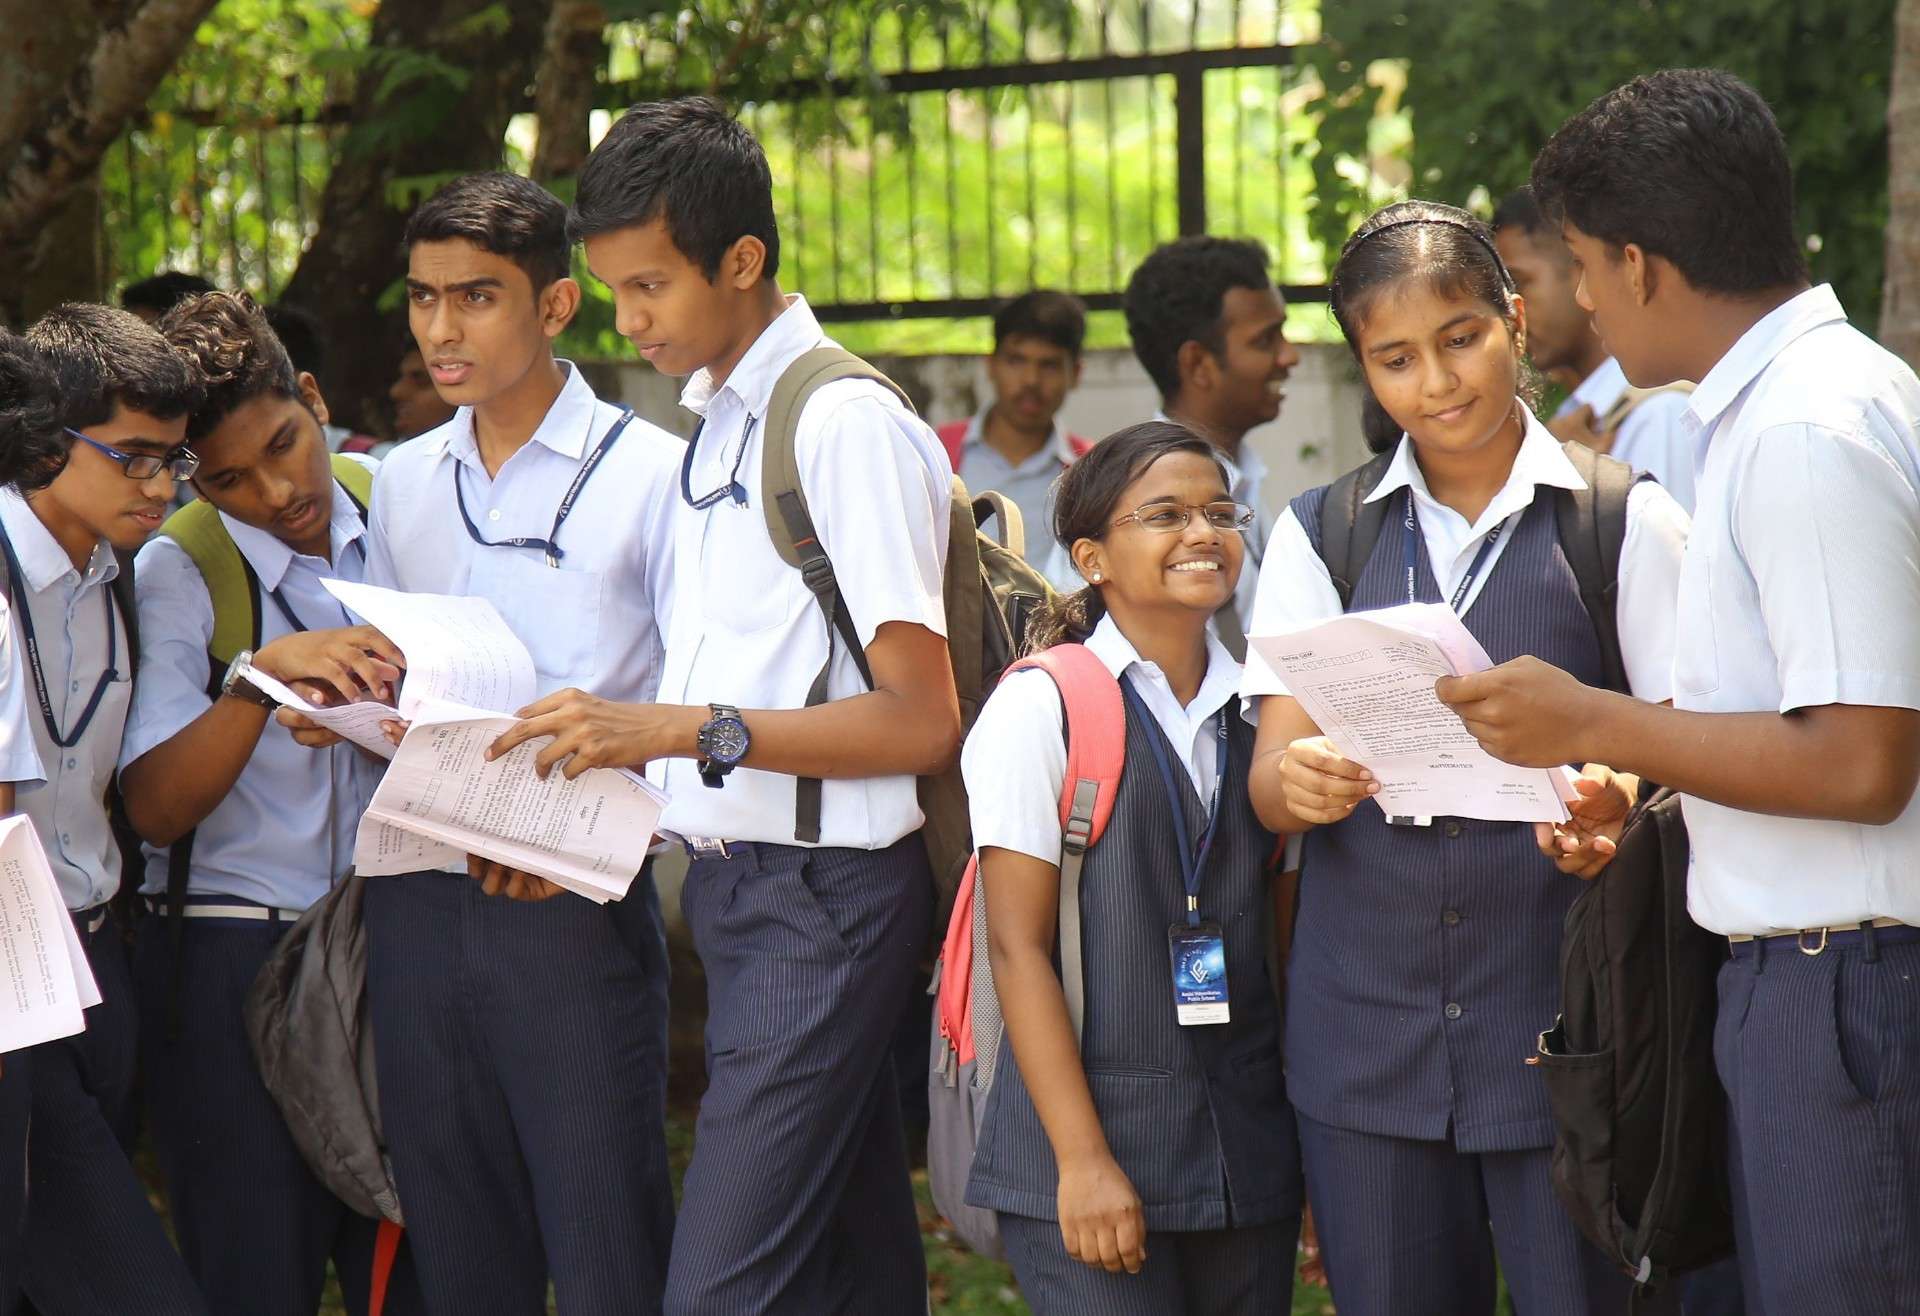 CBSE 10th result 2020 will be released tomorrow, confirms HRD minister